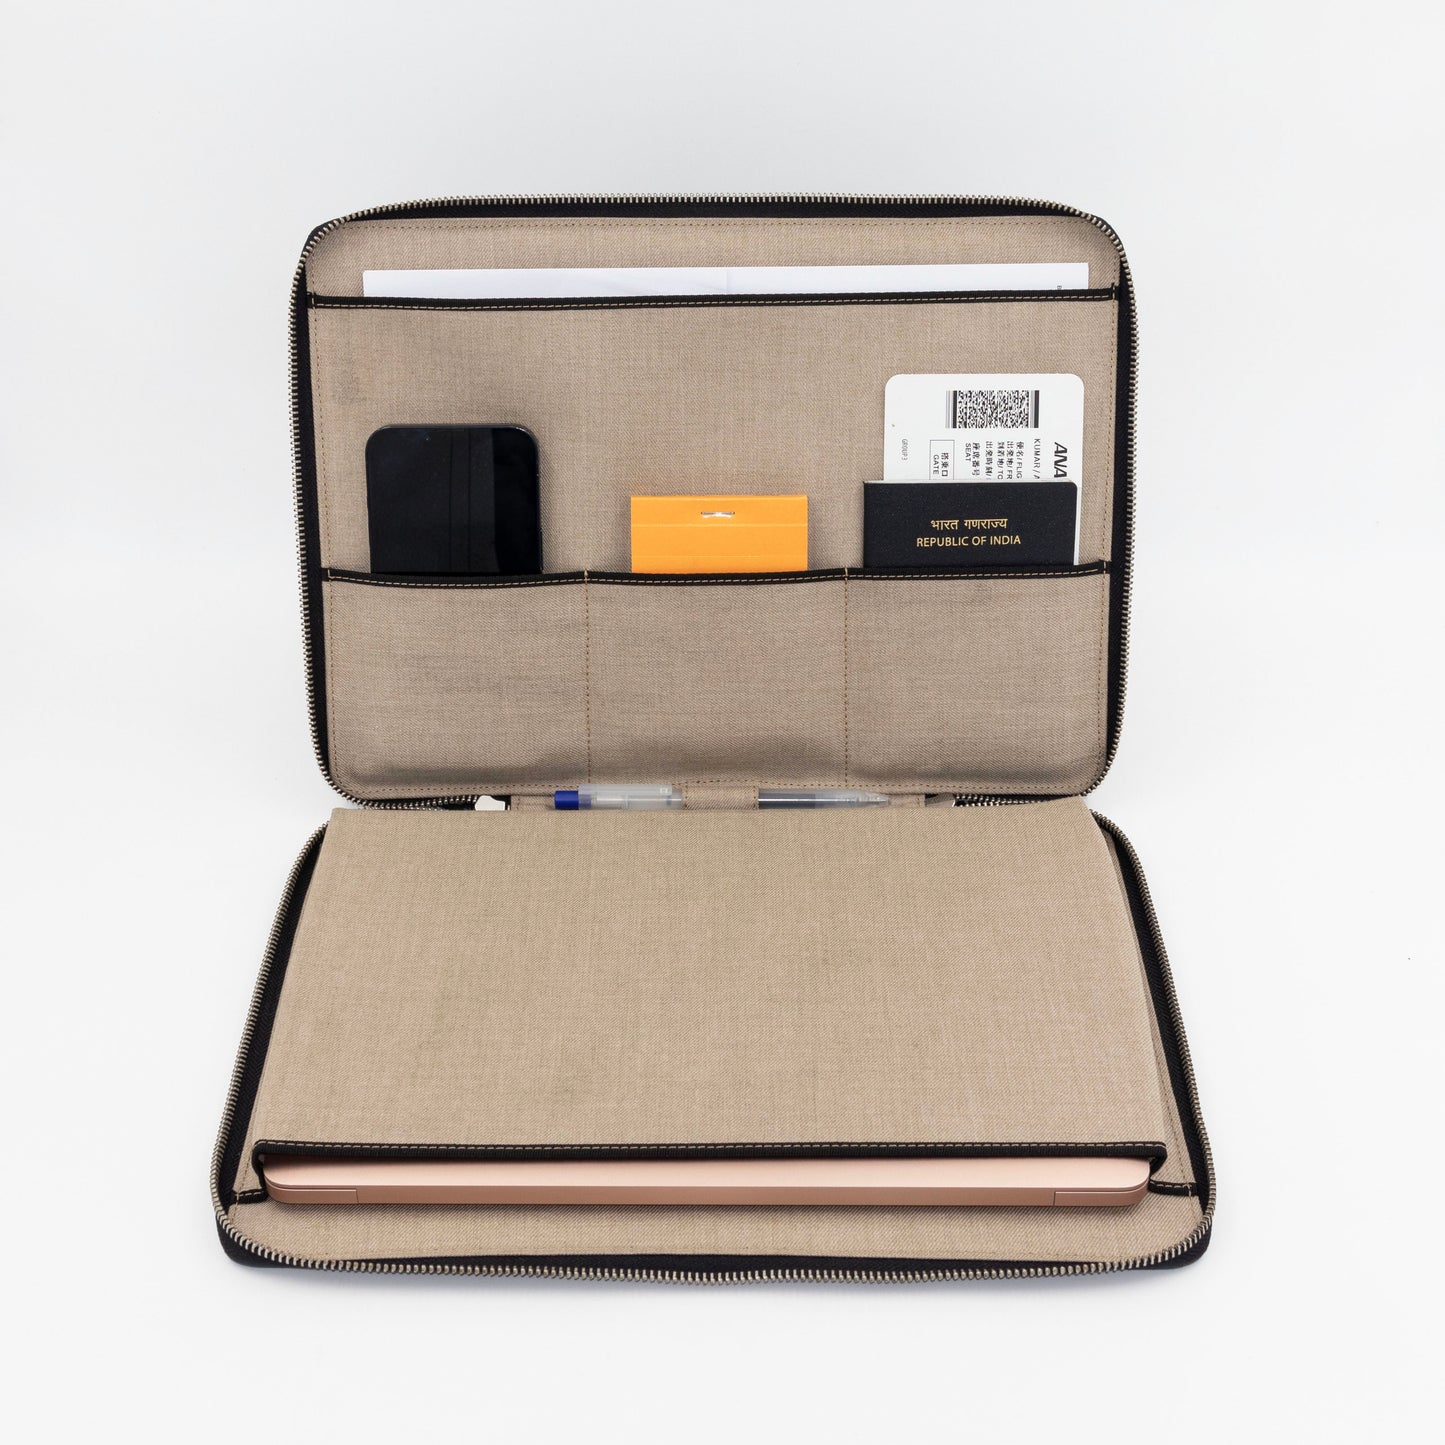 Interior of the leather laptop case featuring a document holder